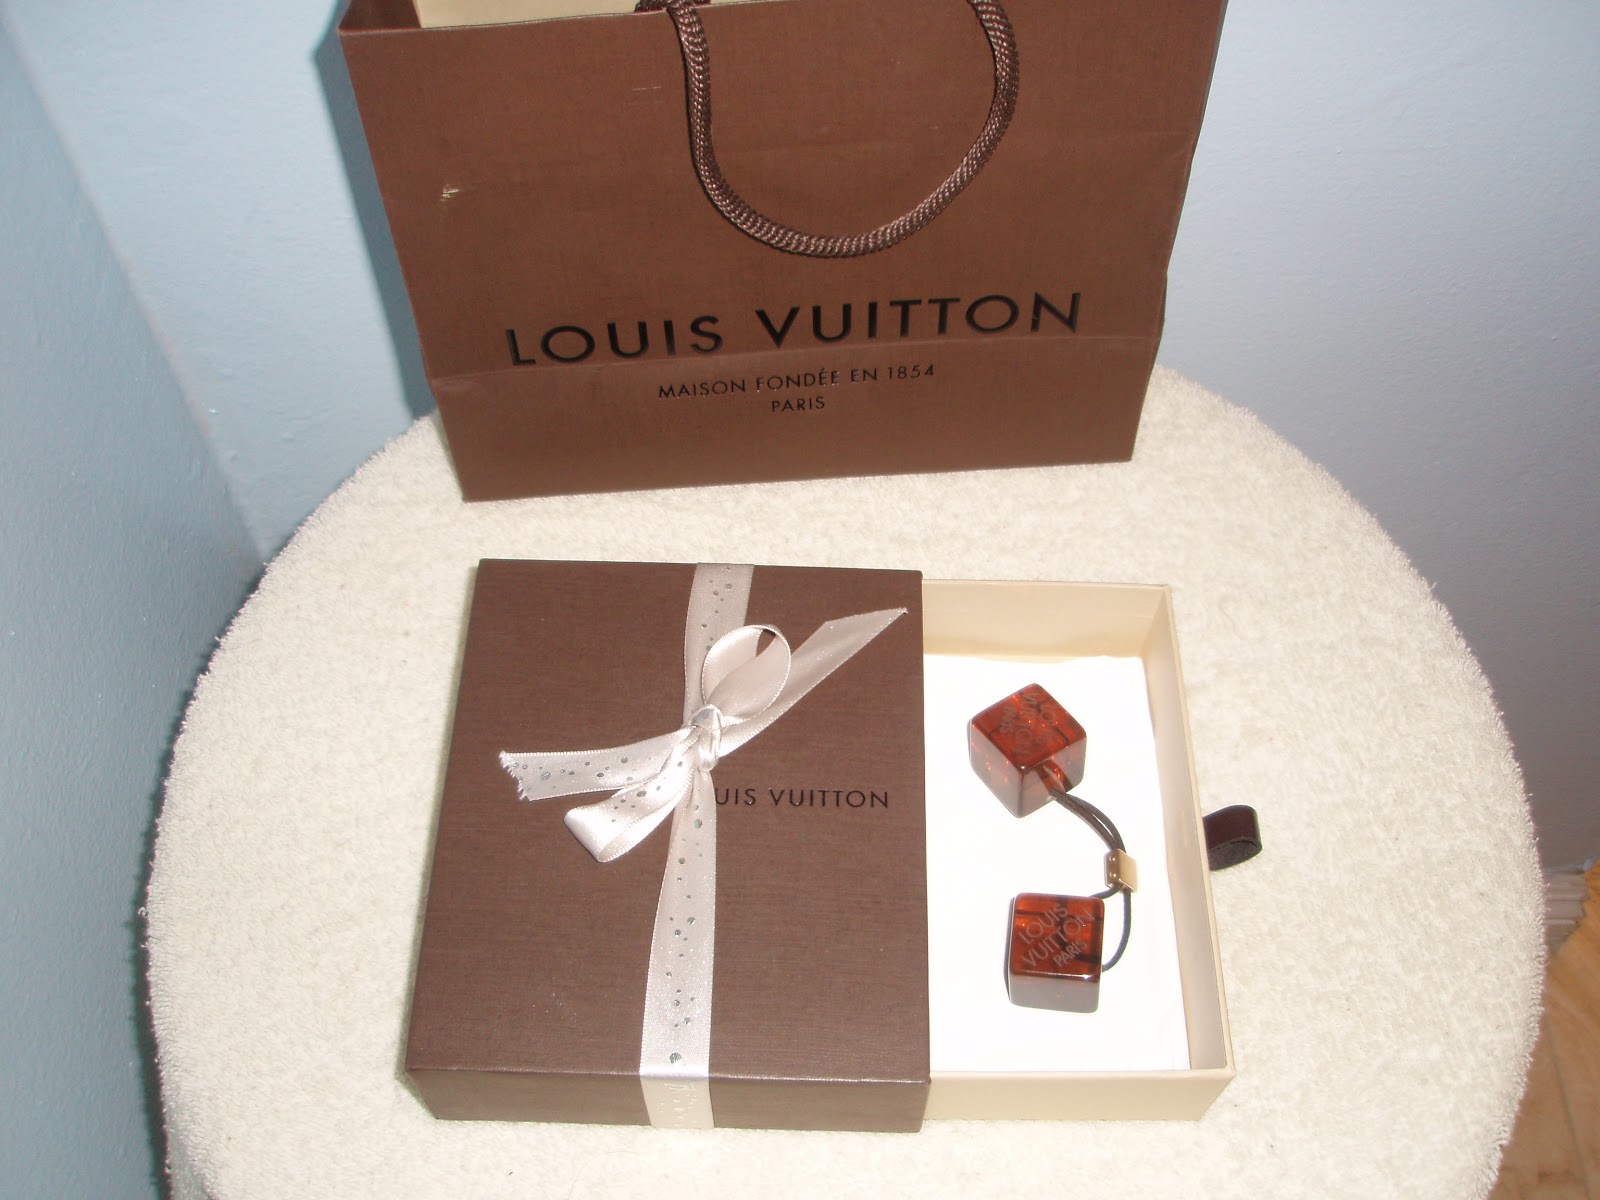 Louis Vuitton Gift Box and LV Ribbon  Louis vuitton gifts, Gift box, Gifts